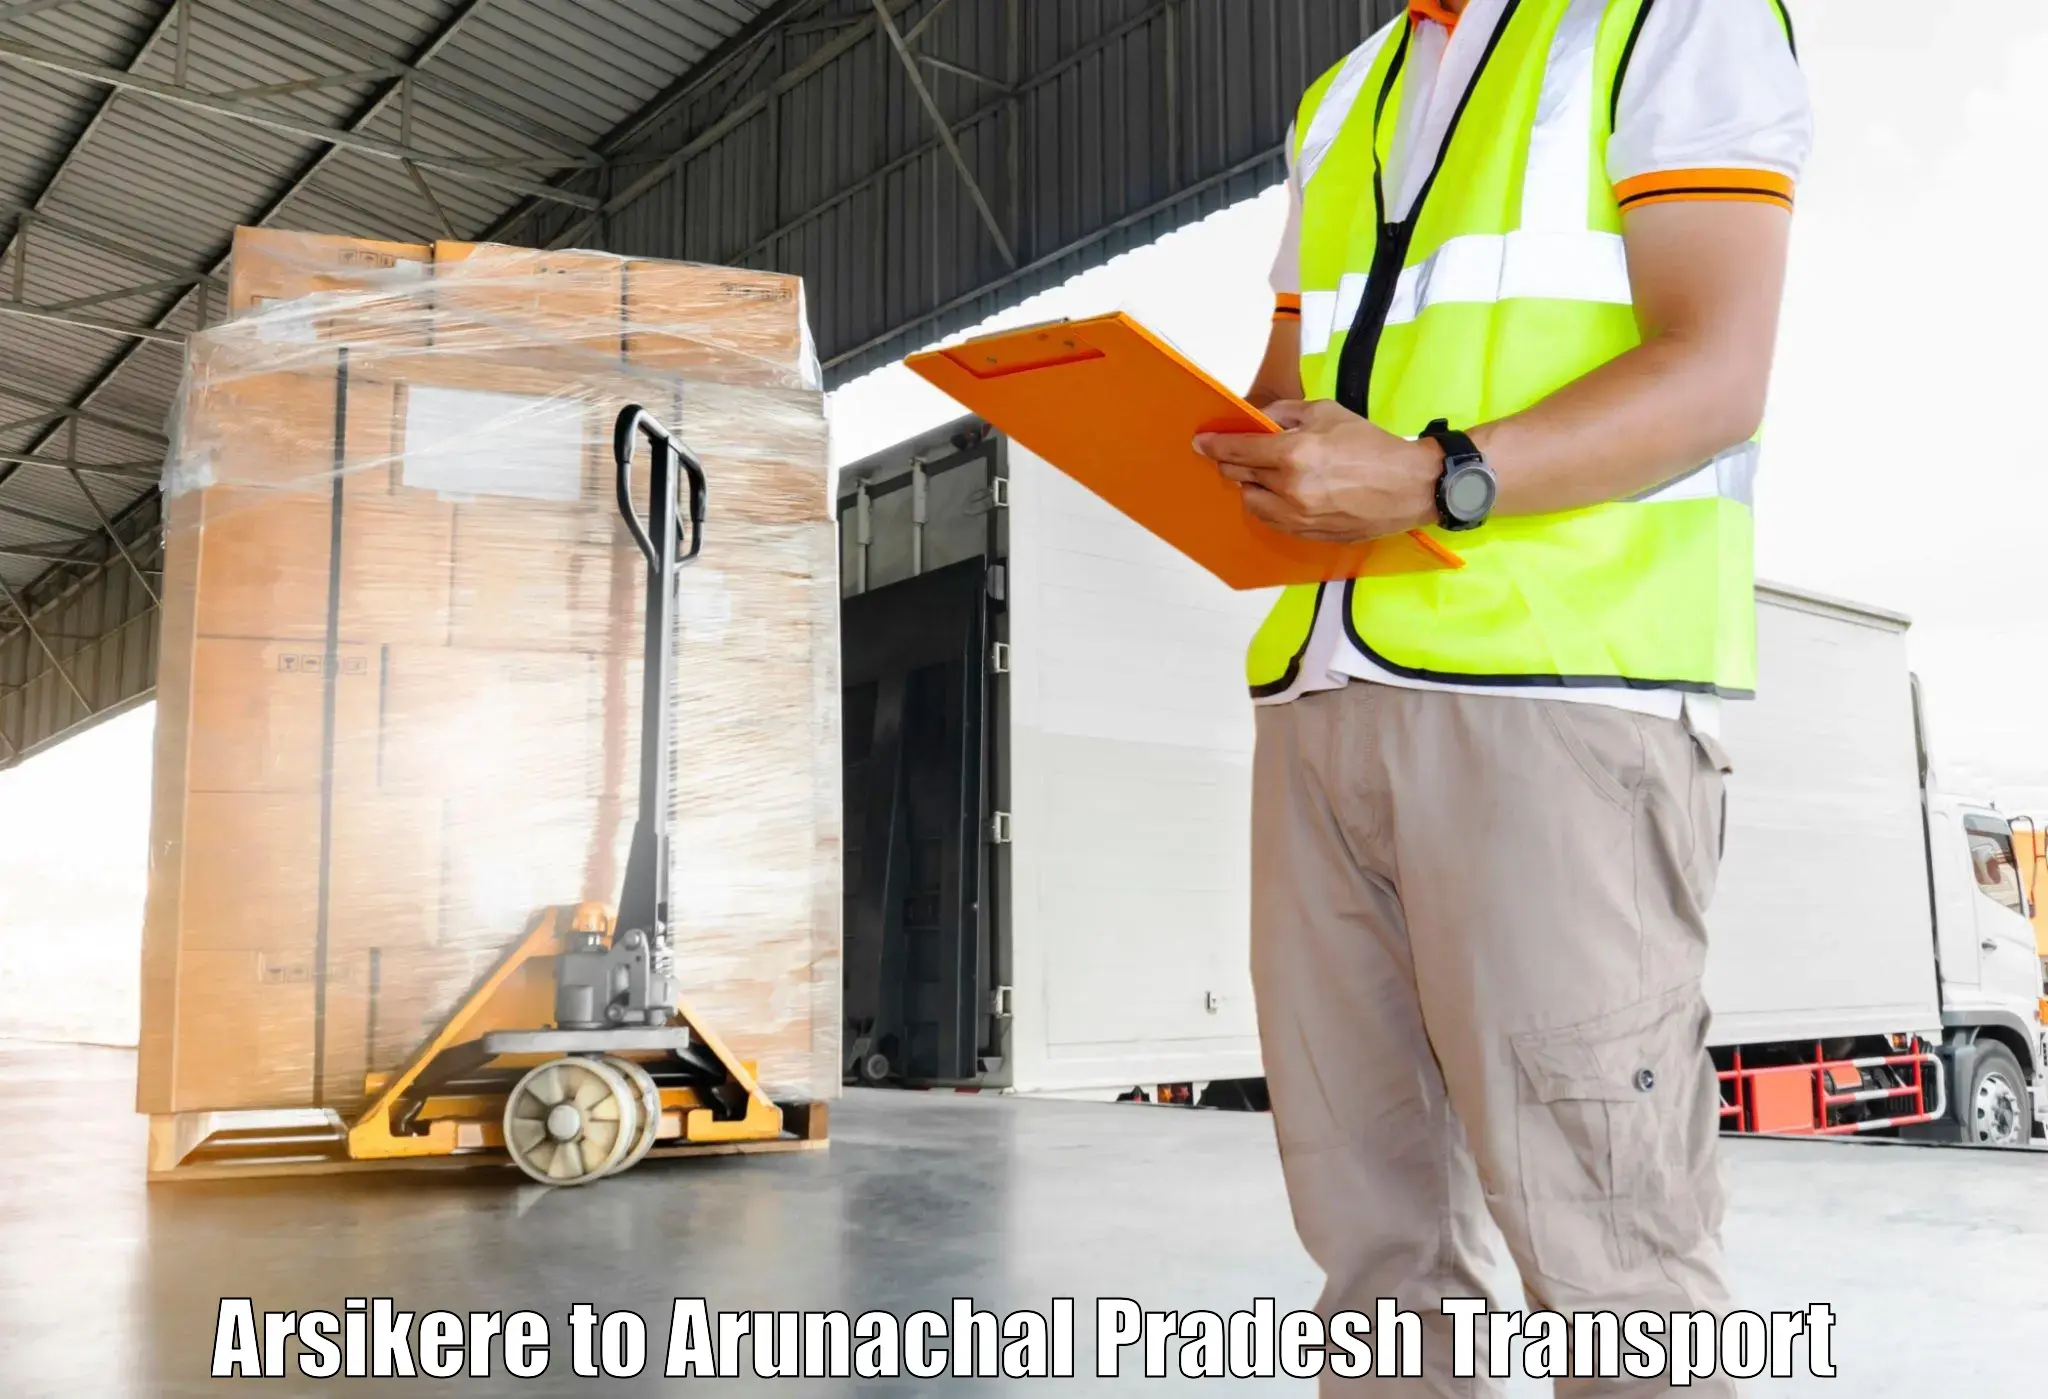 Two wheeler transport services Arsikere to Longding